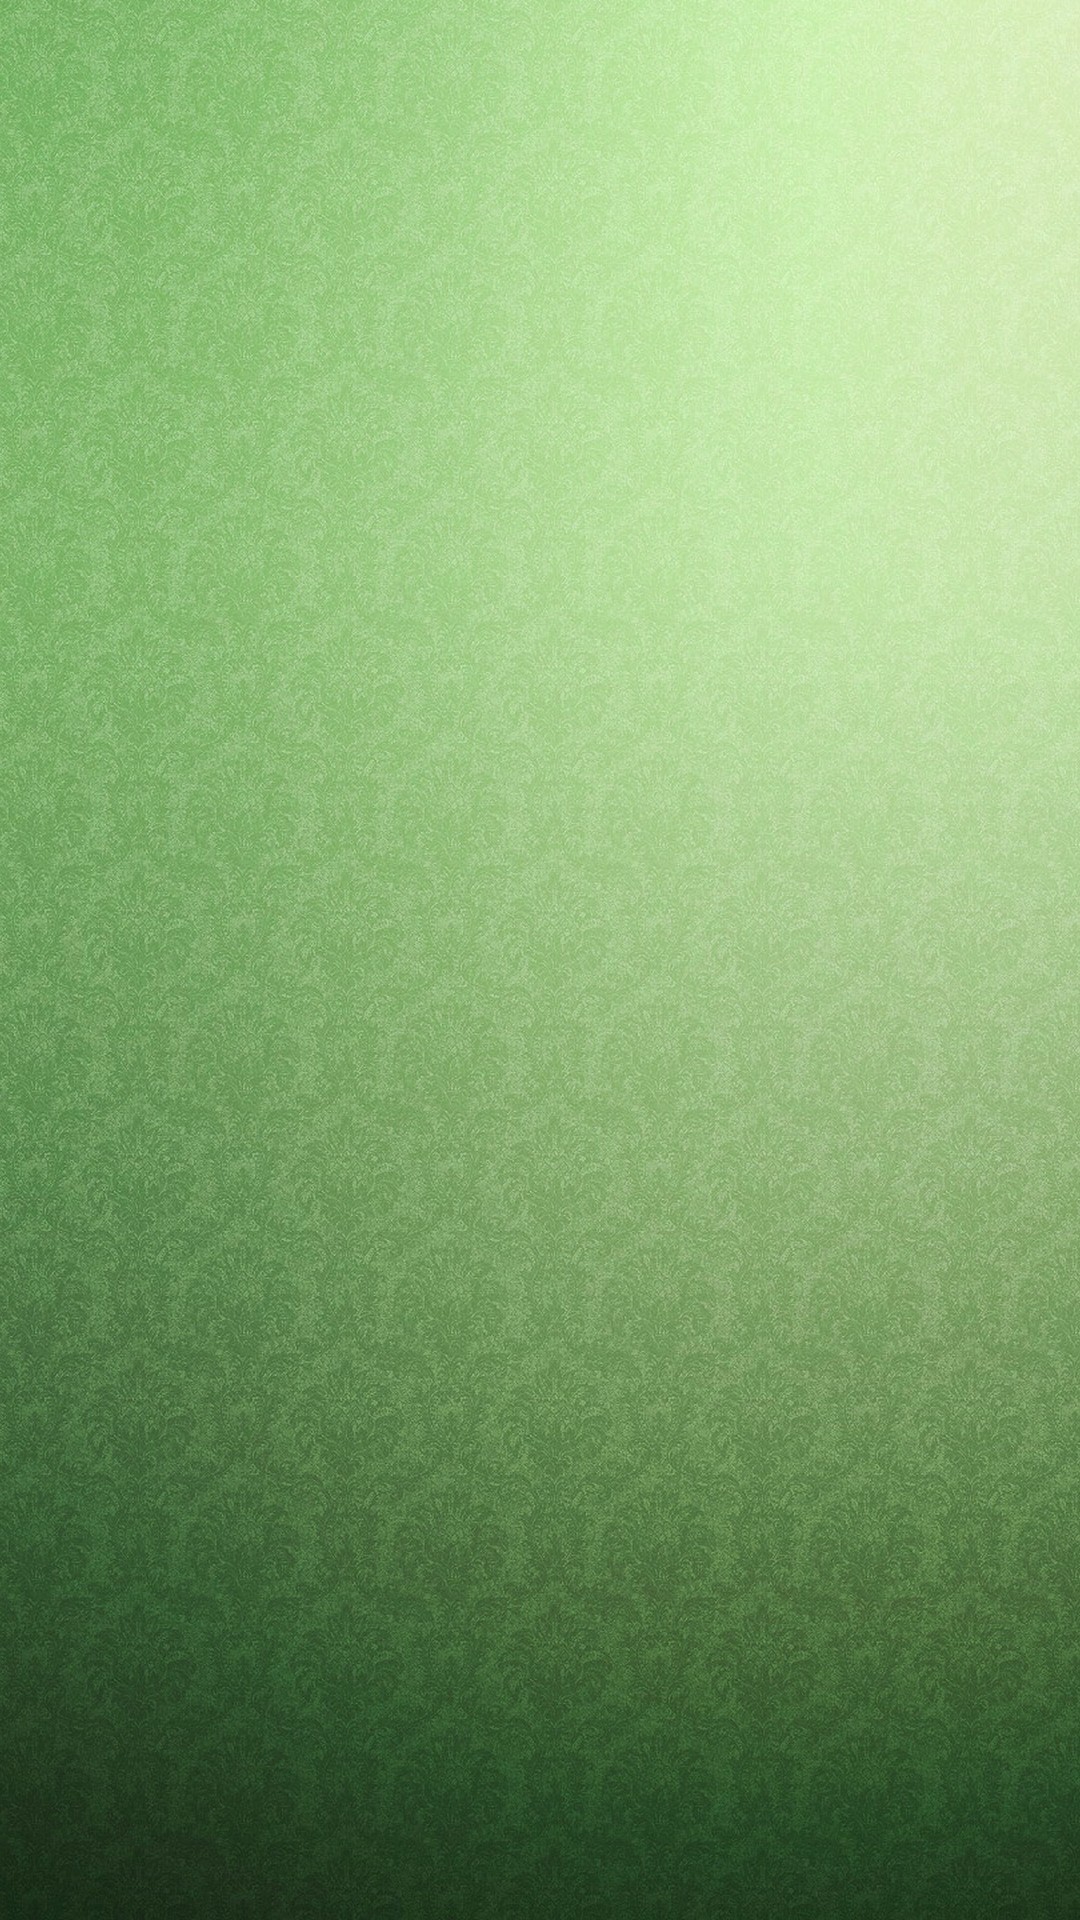 Green Colour iPhone Wallpaper with resolution 1080X1920 pixel. You can make this wallpaper for your iPhone 5, 6, 7, 8, X backgrounds, Mobile Screensaver, or iPad Lock Screen